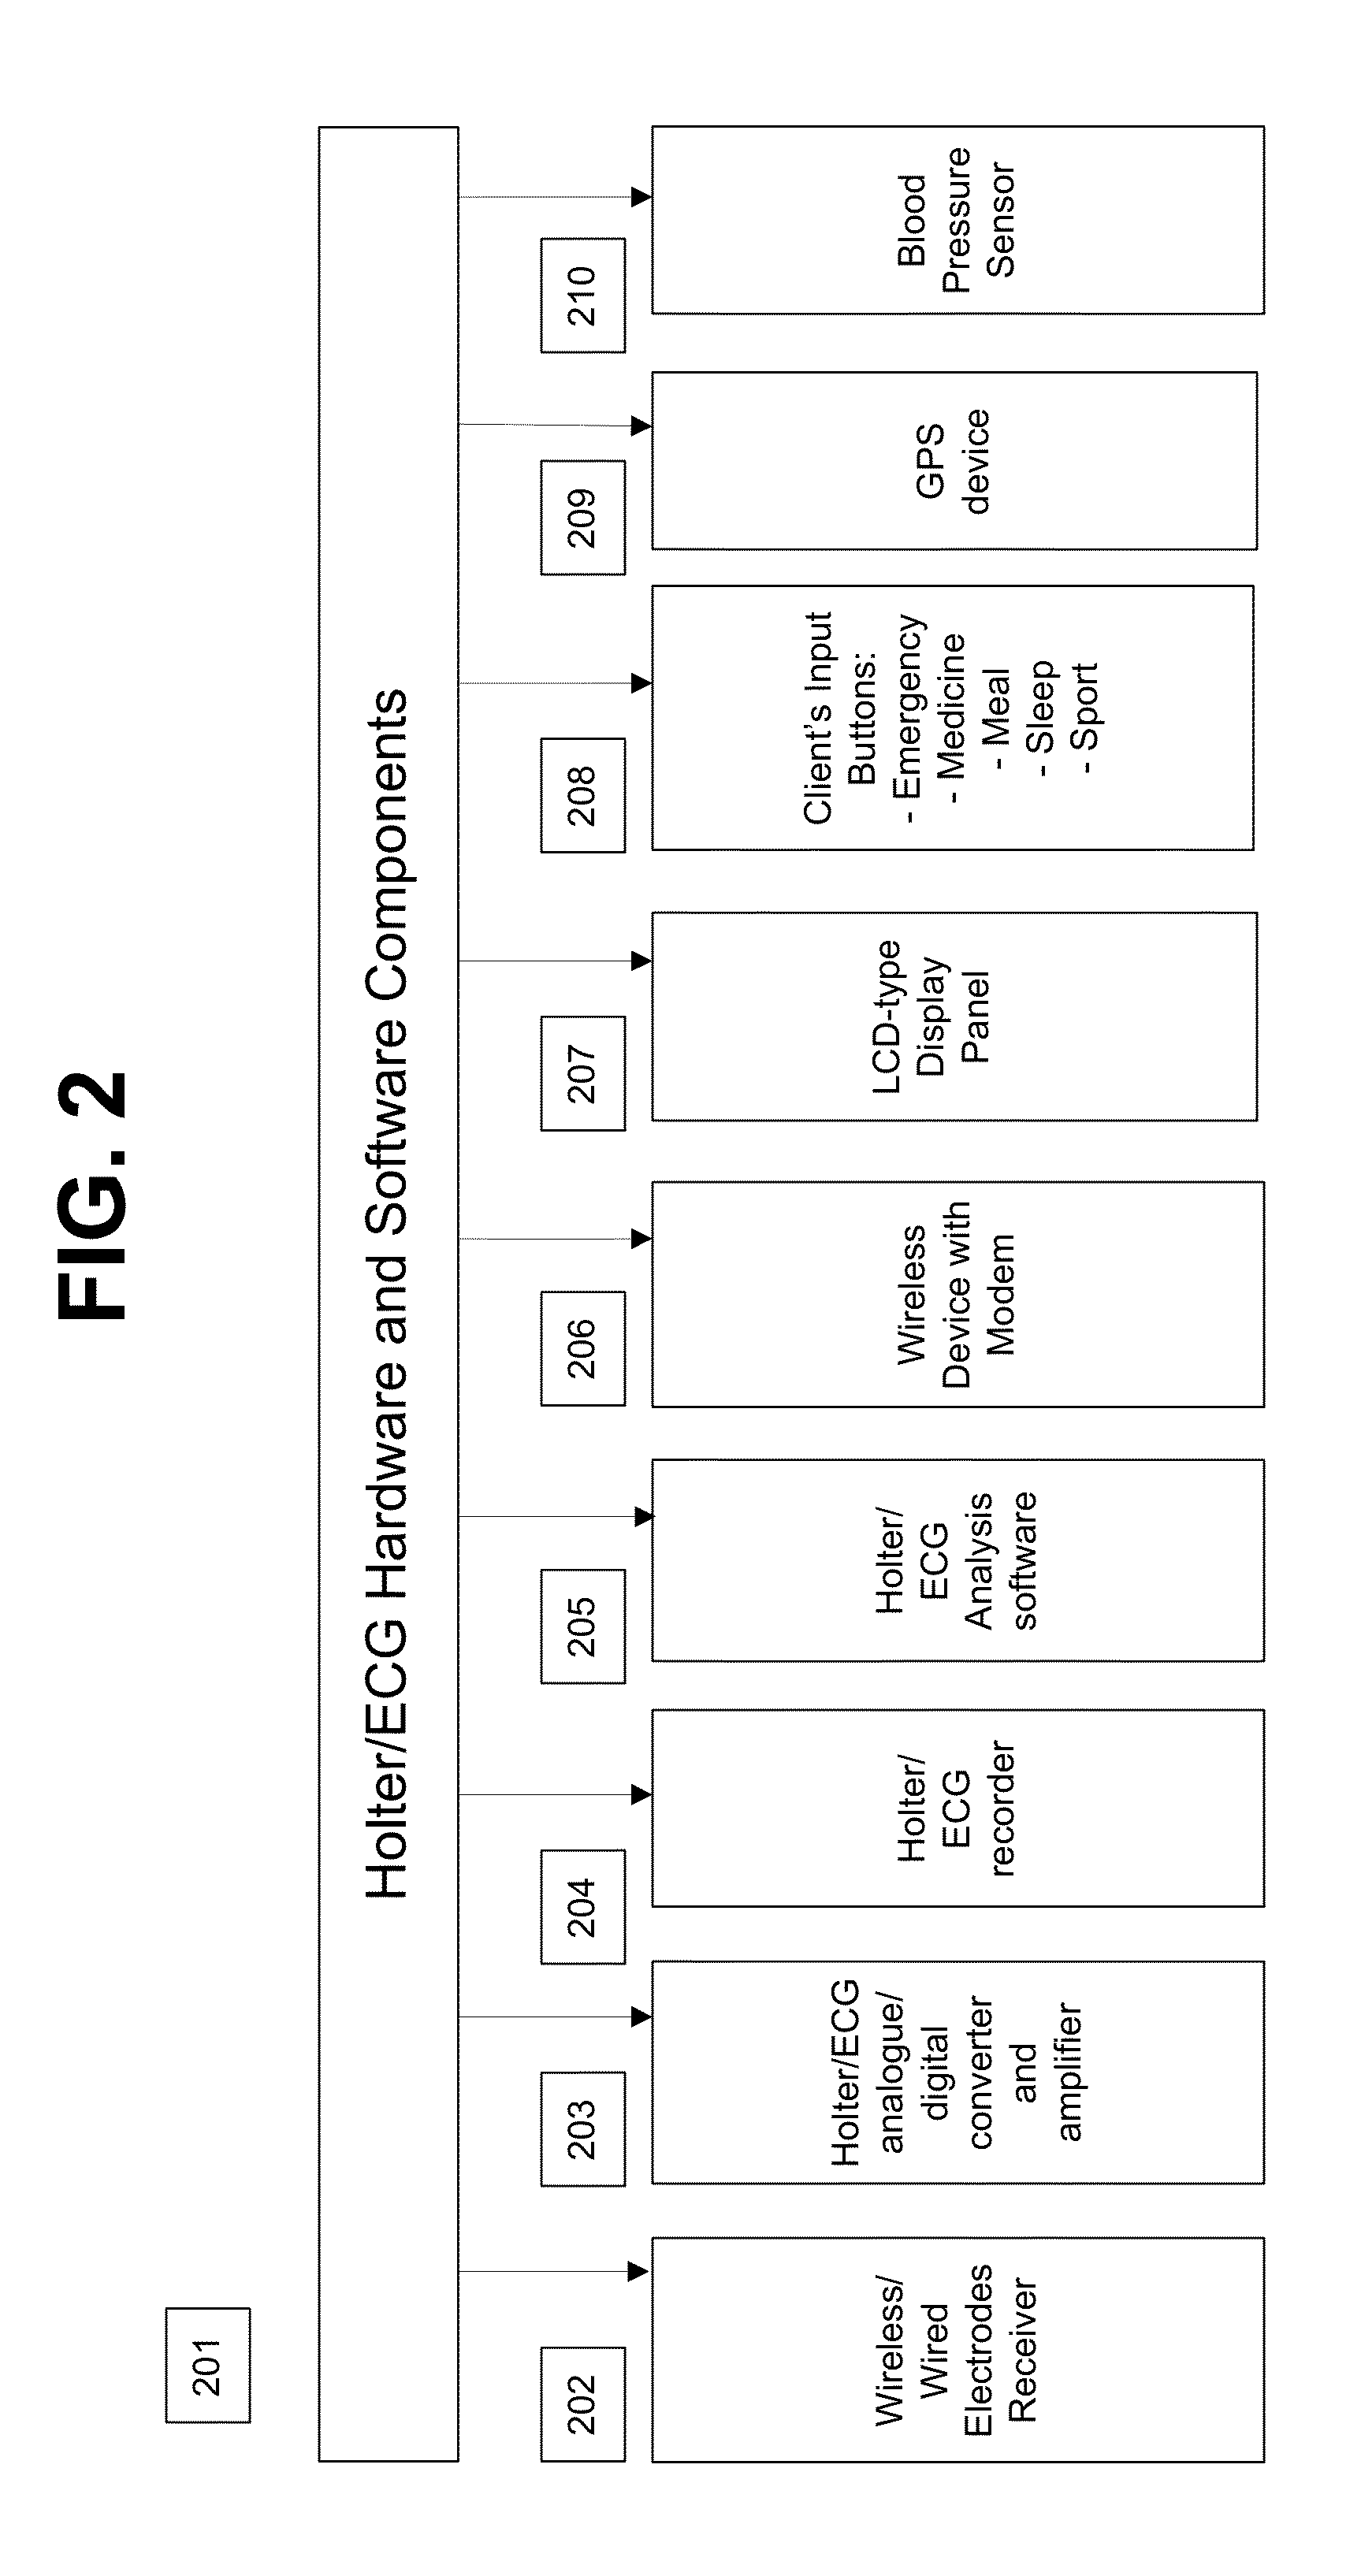 System and apparatus for providing diagnosis and personalized abnormalities alerts and for providing adaptive responses in clinical trials